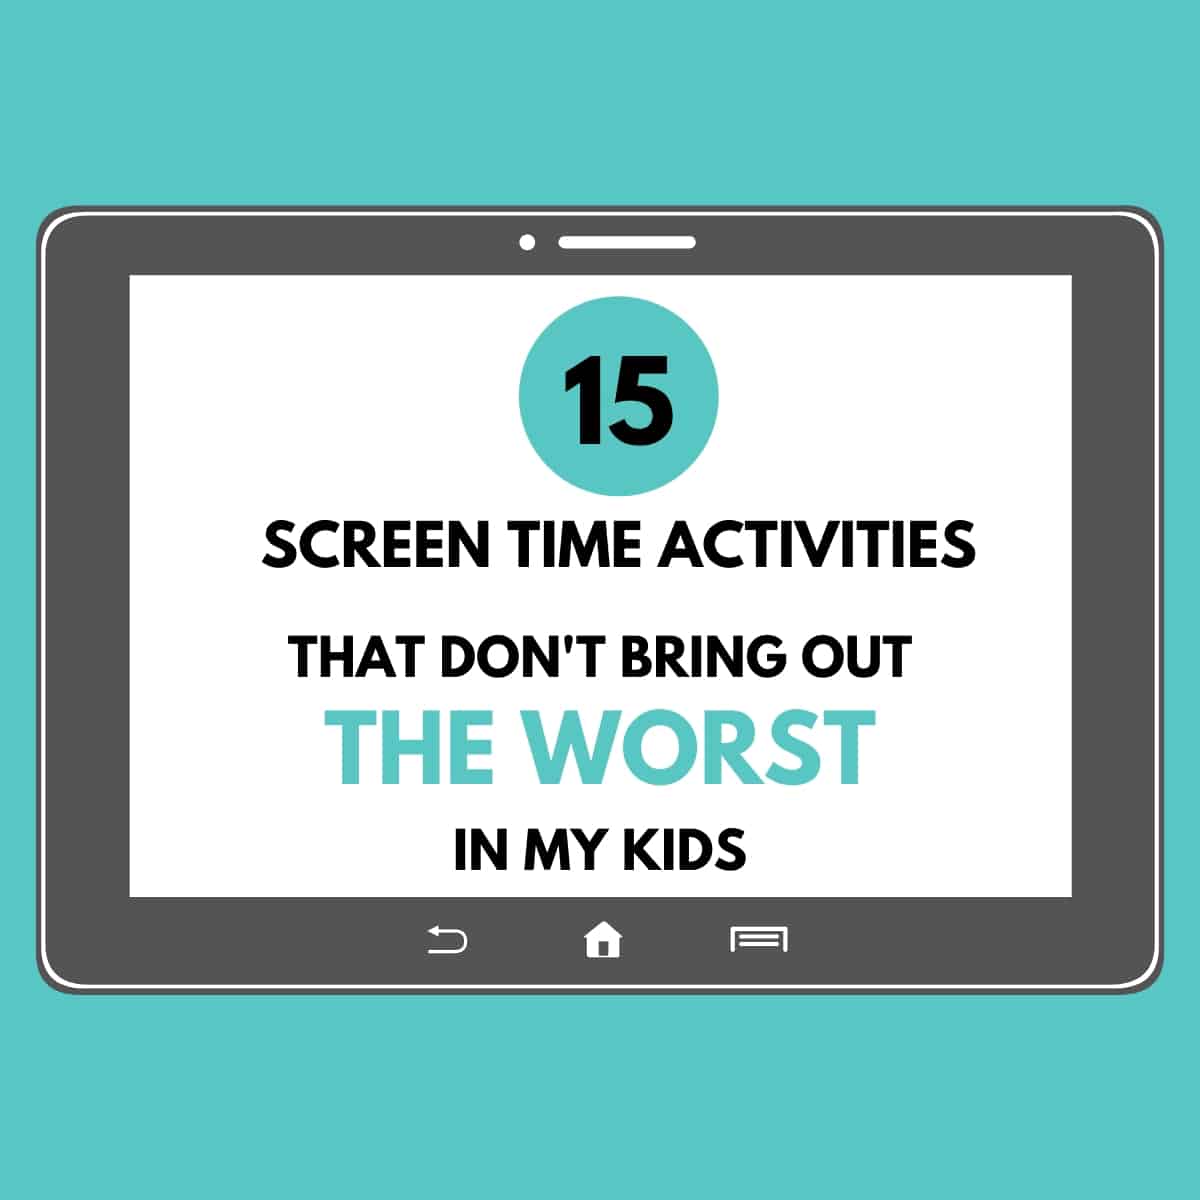 ipad image with text 15 screentime activities that don't bring out the worst in my kids